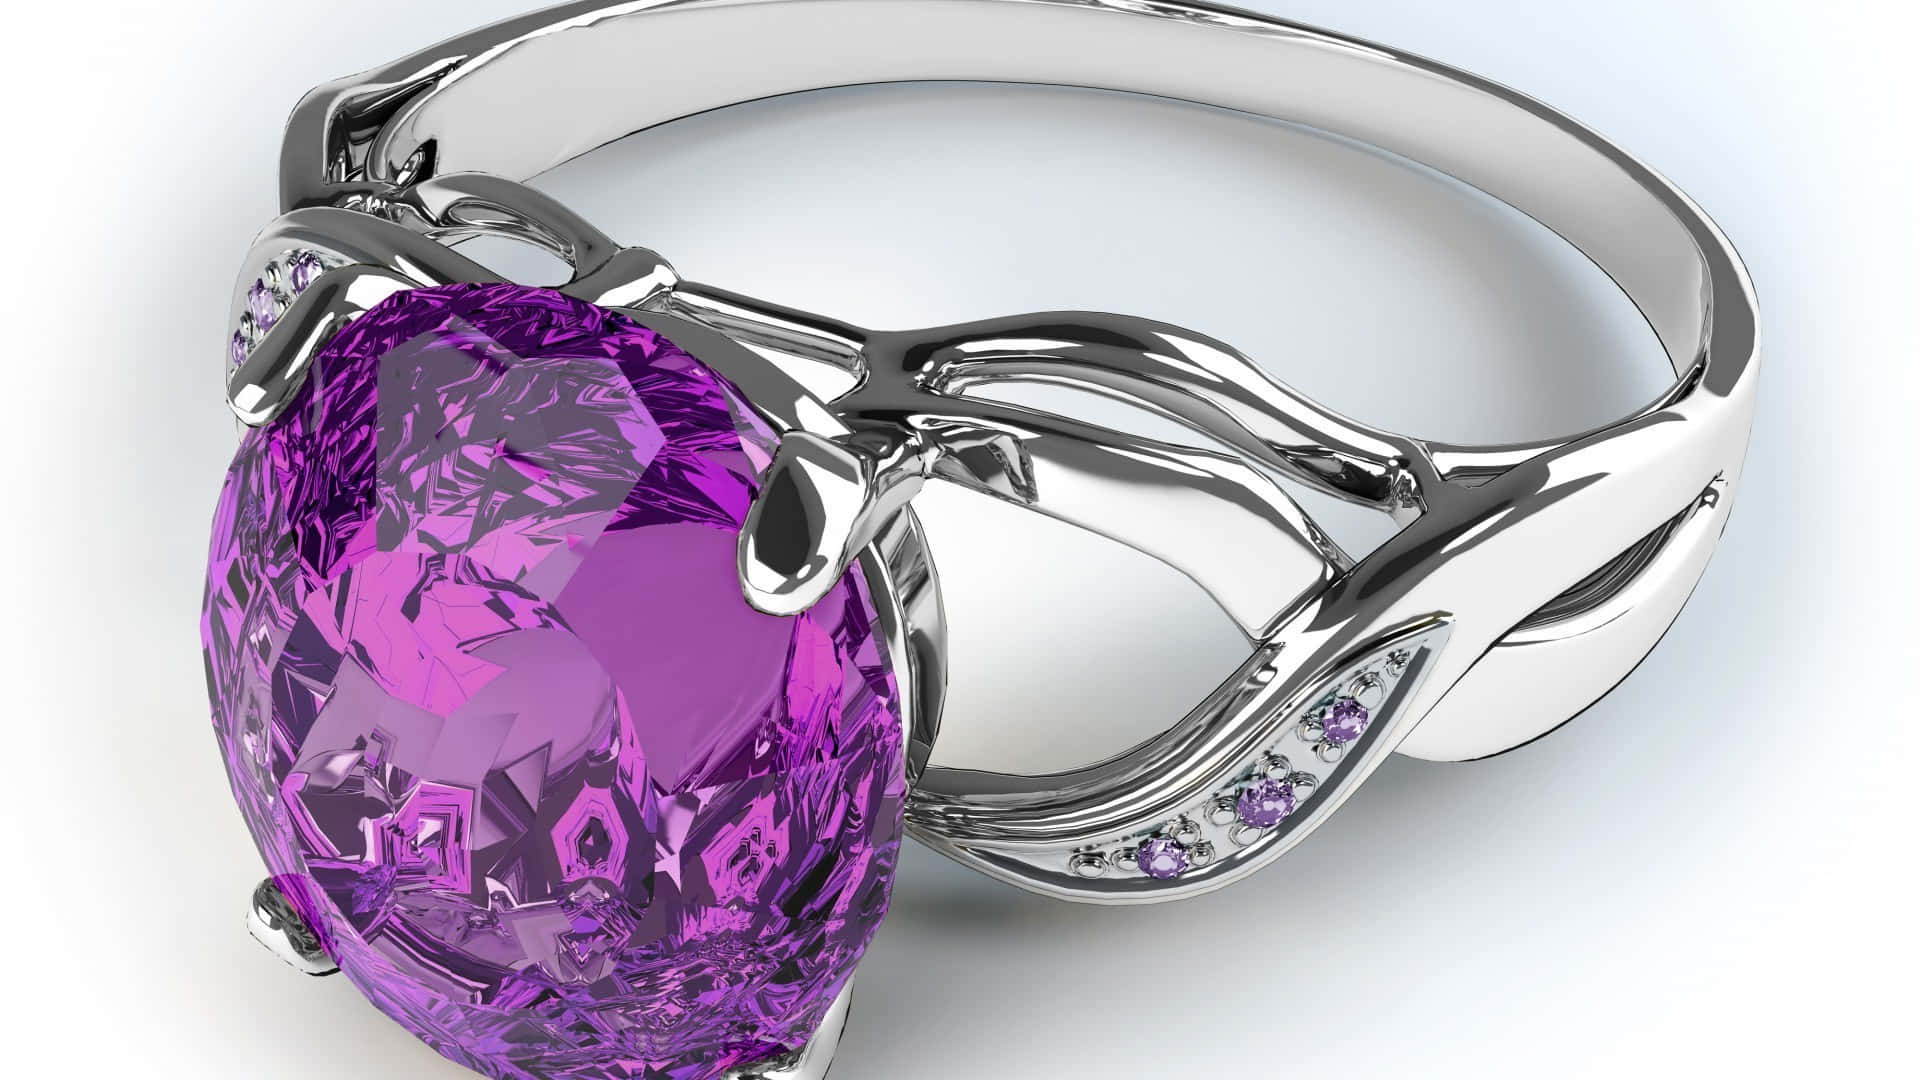 Adorn yourself with this unique shade of purple jewelry Wallpaper